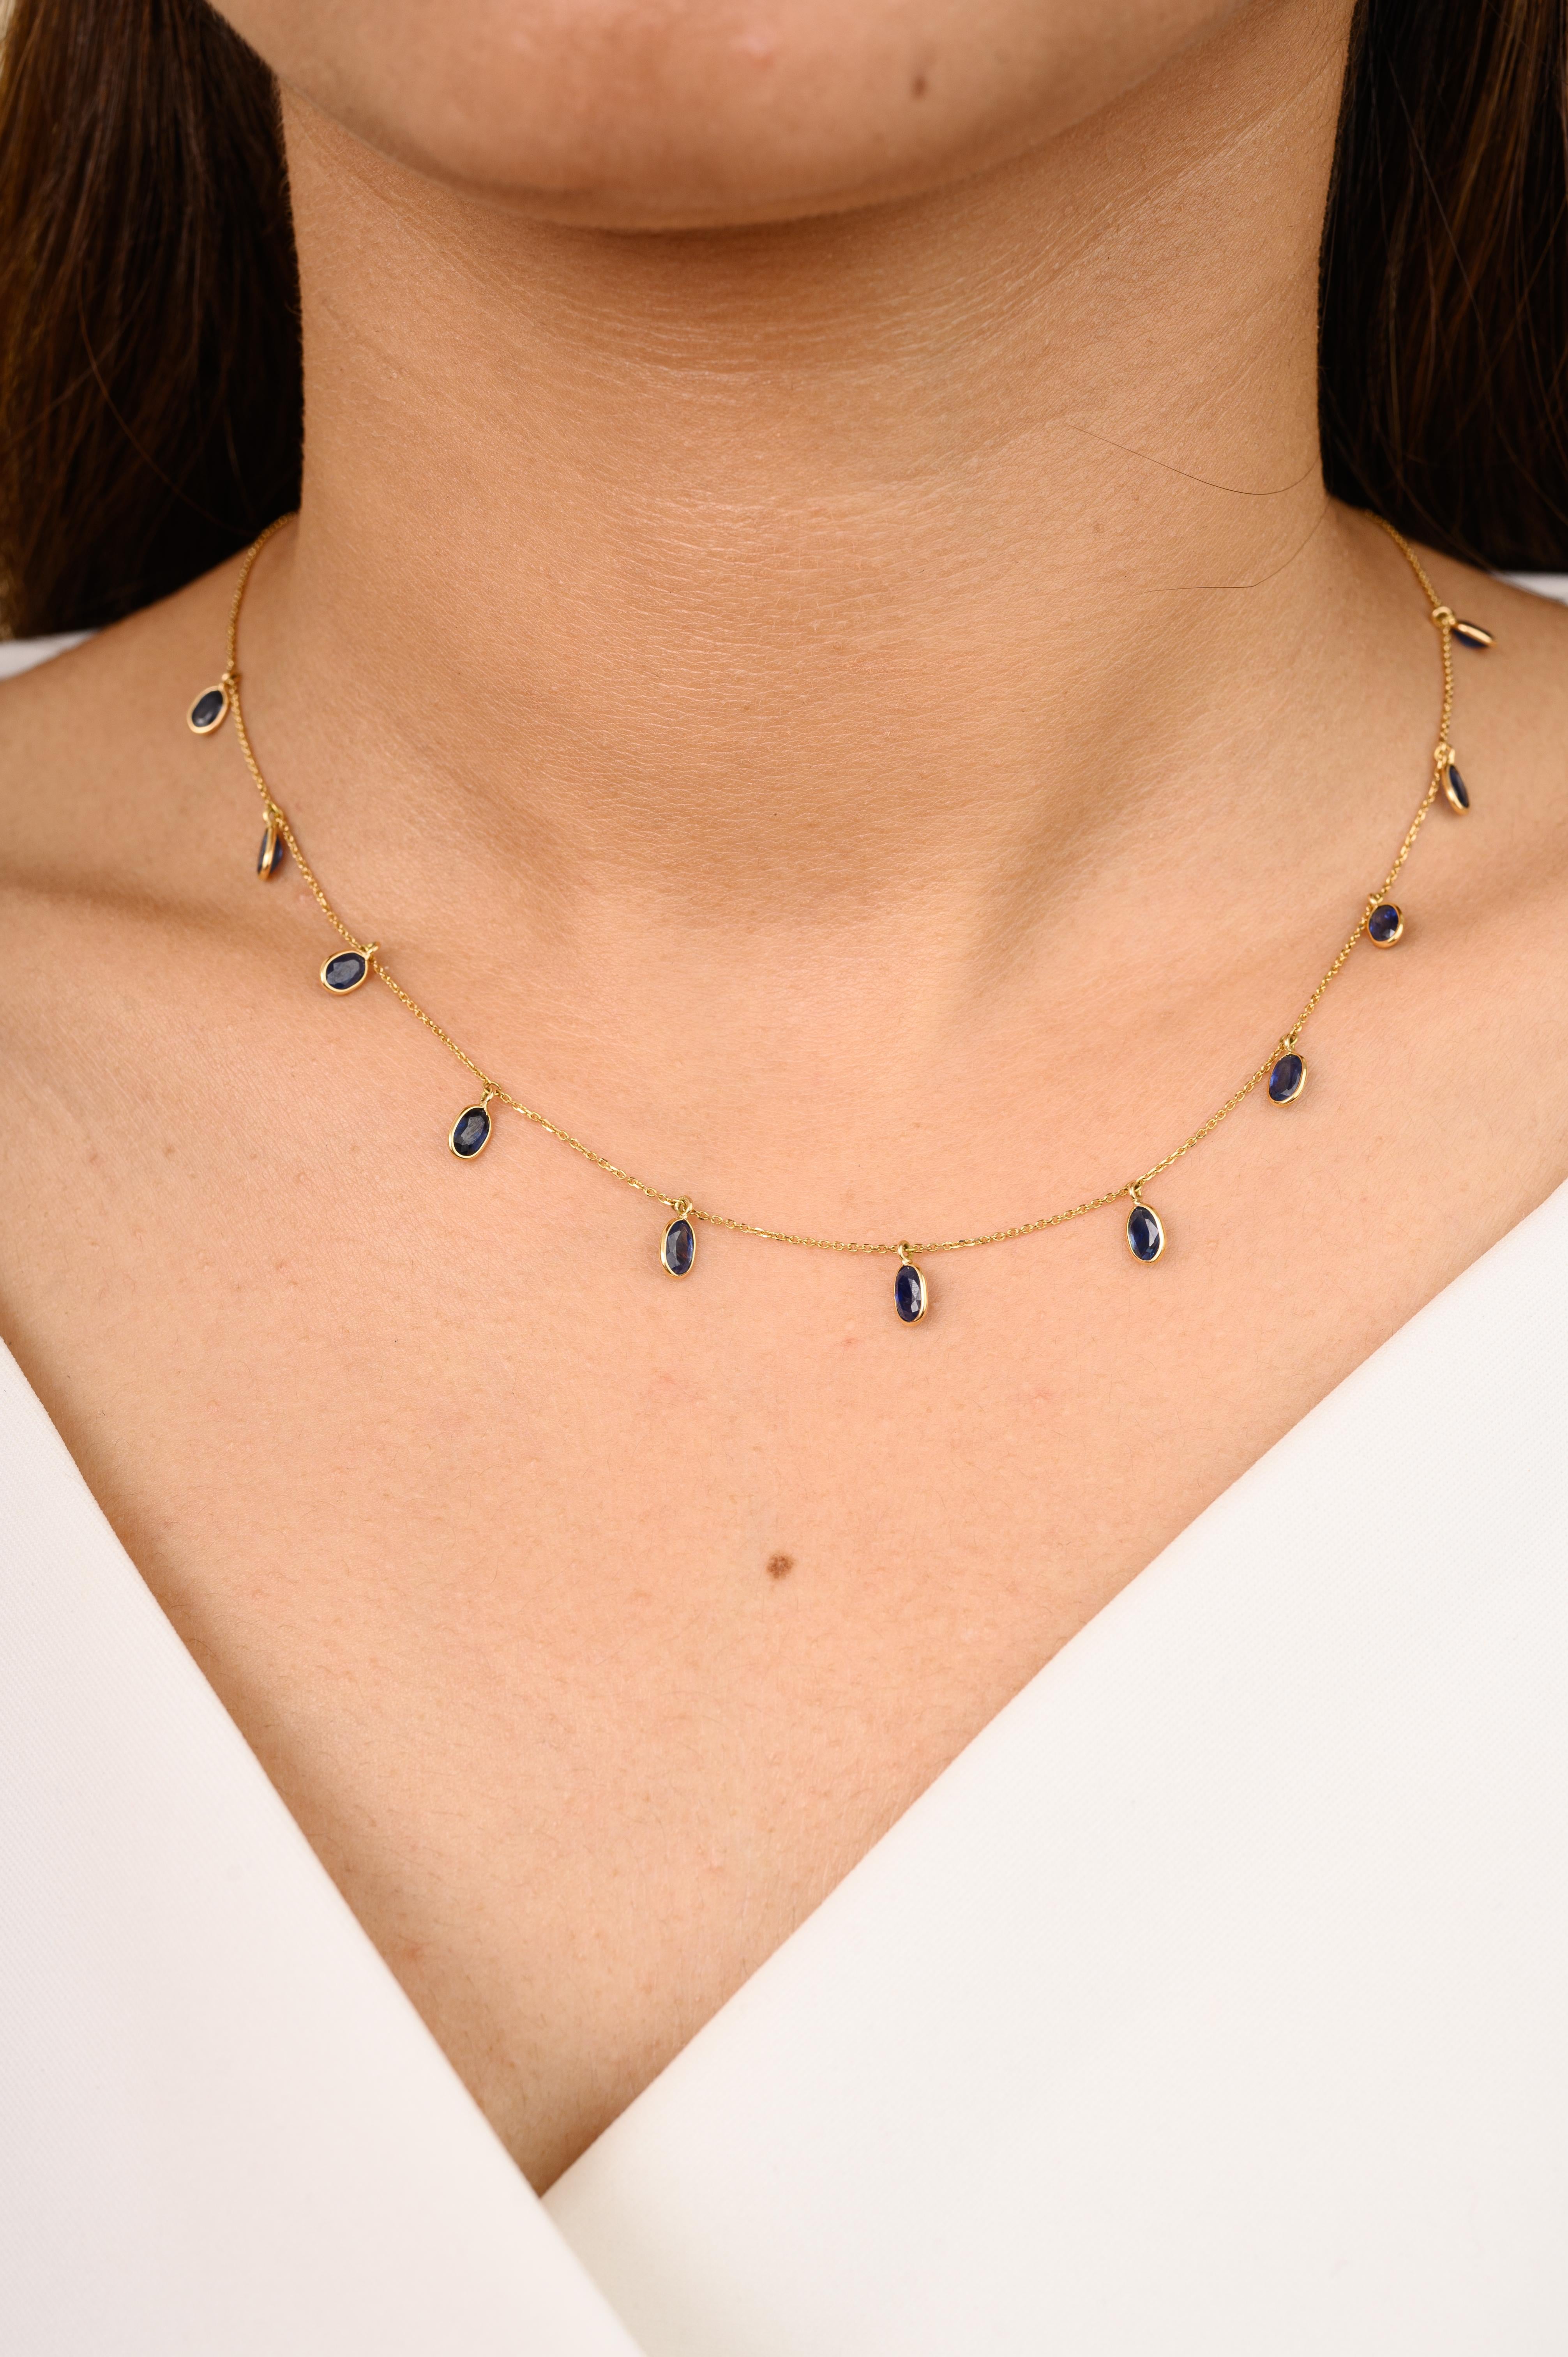 Minimalist Blue Sapphire Charm Necklace in 18K Gold studded with oval cut blue sapphire. This stunning piece of jewelry instantly elevates a casual look or dressy outfit. 
Sapphire stimulate concentration and reduces stress.
Designed with a oval cut